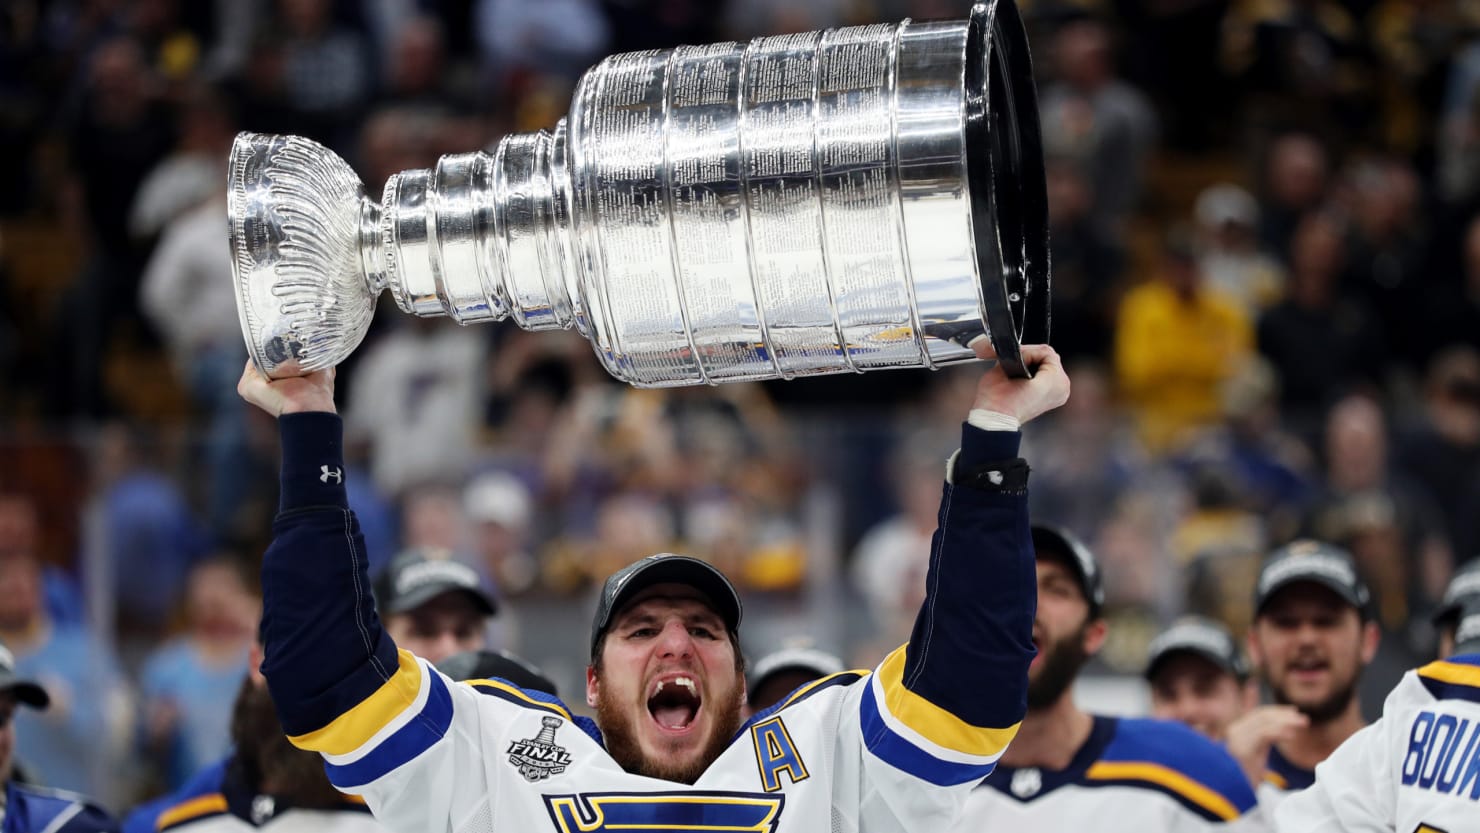 St. Louis Blues Win the Stanley Cup, Beating the Boston Bruins 4-1